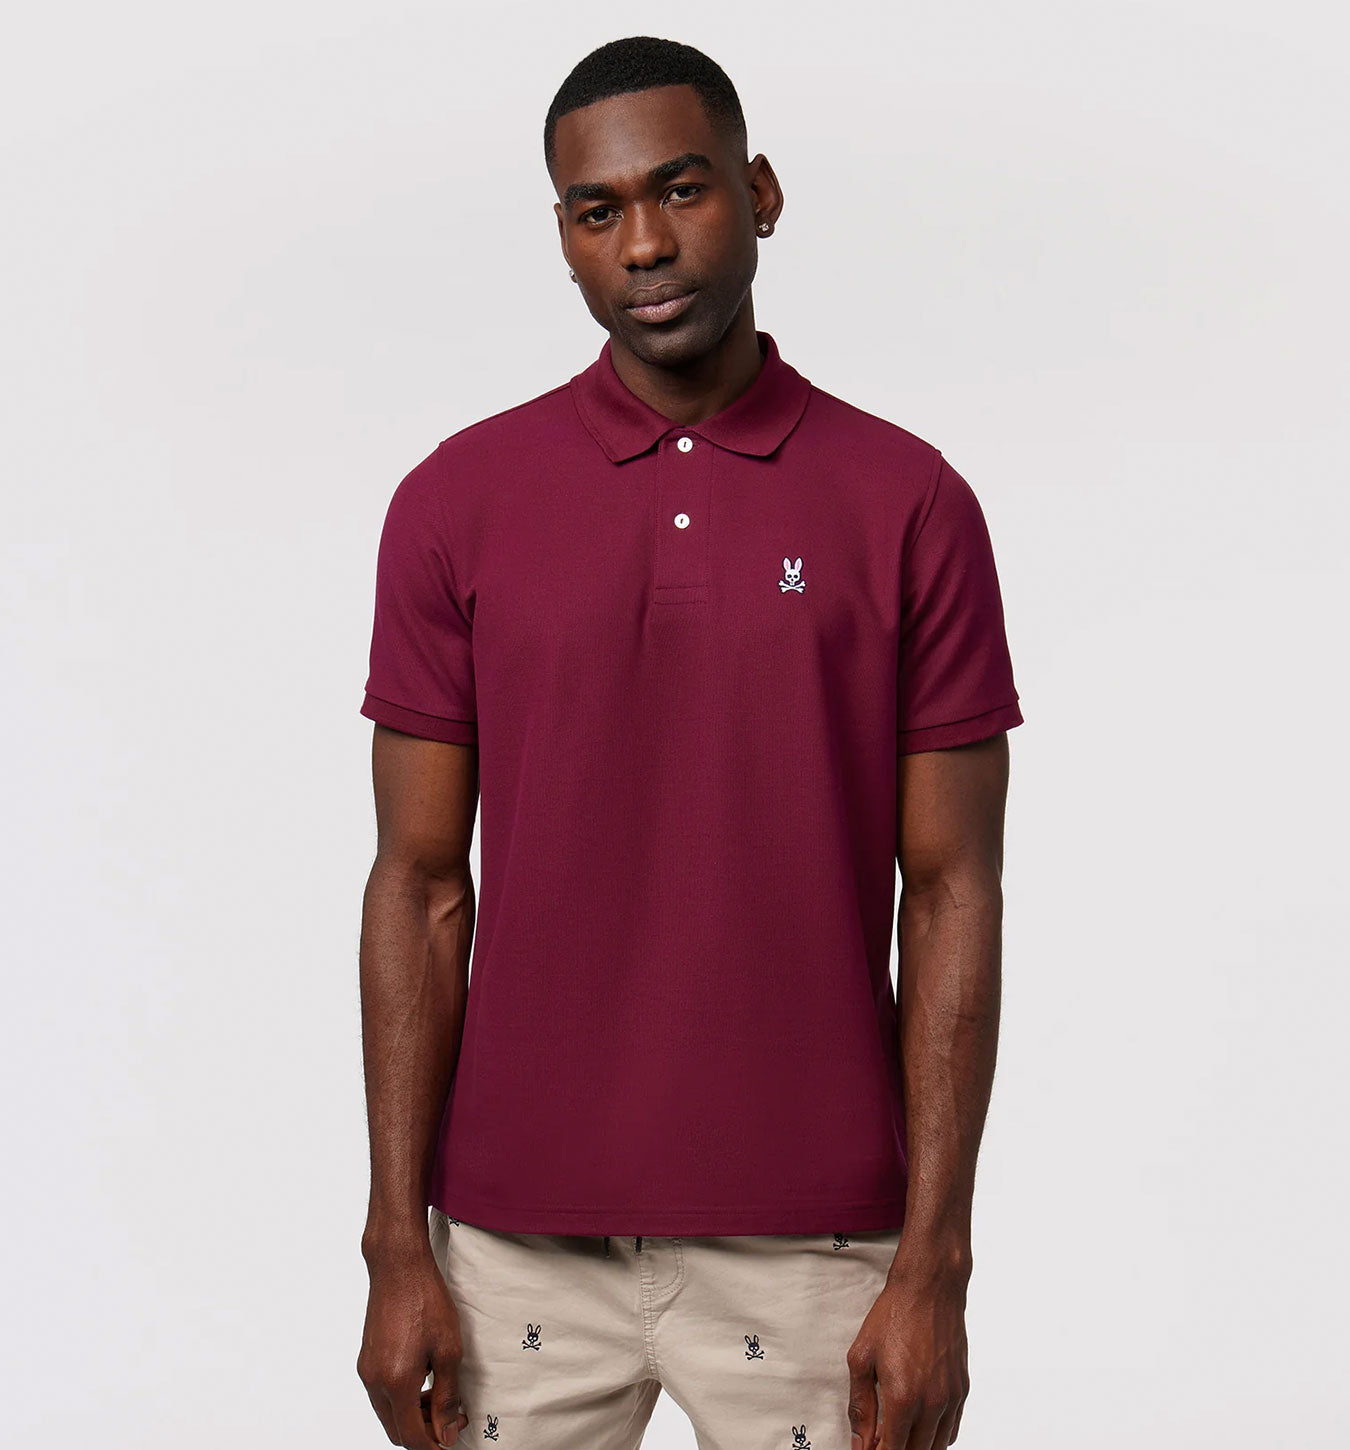 Psycho Bunny Polo in Pink for Men